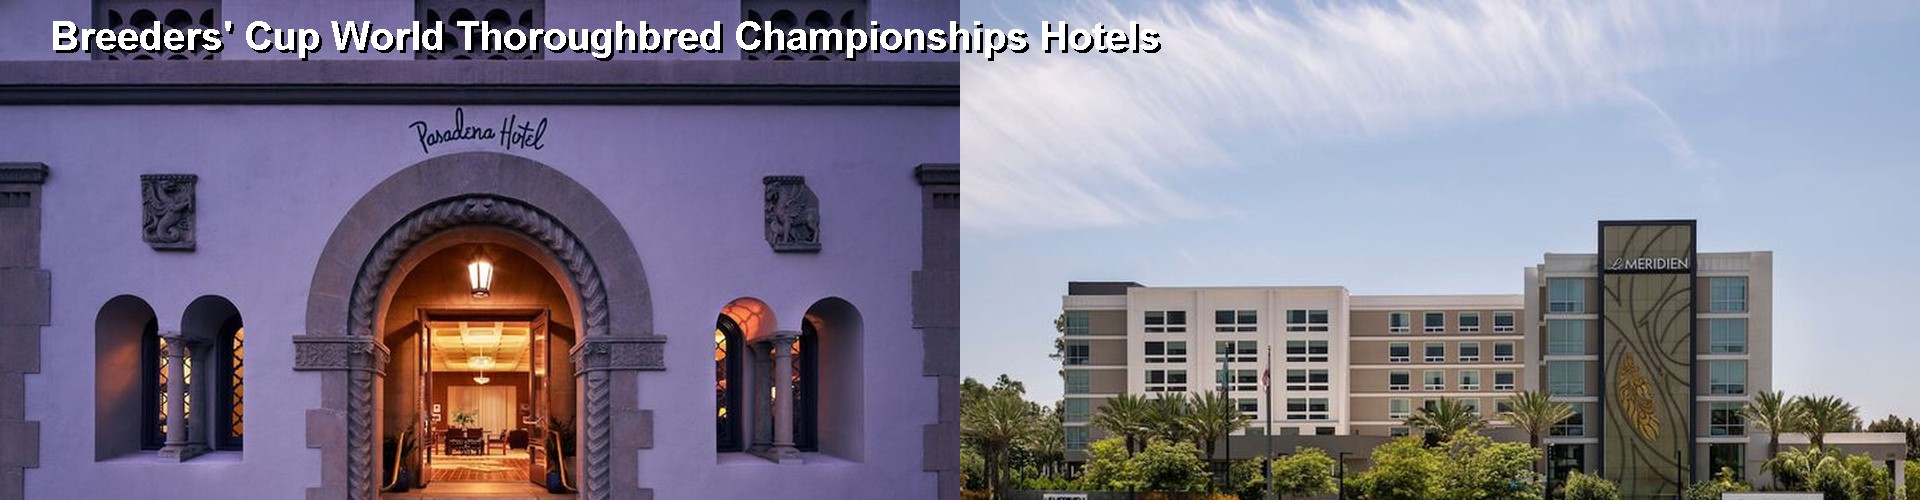 5 Best Hotels near Breeders' Cup World Thoroughbred Championships